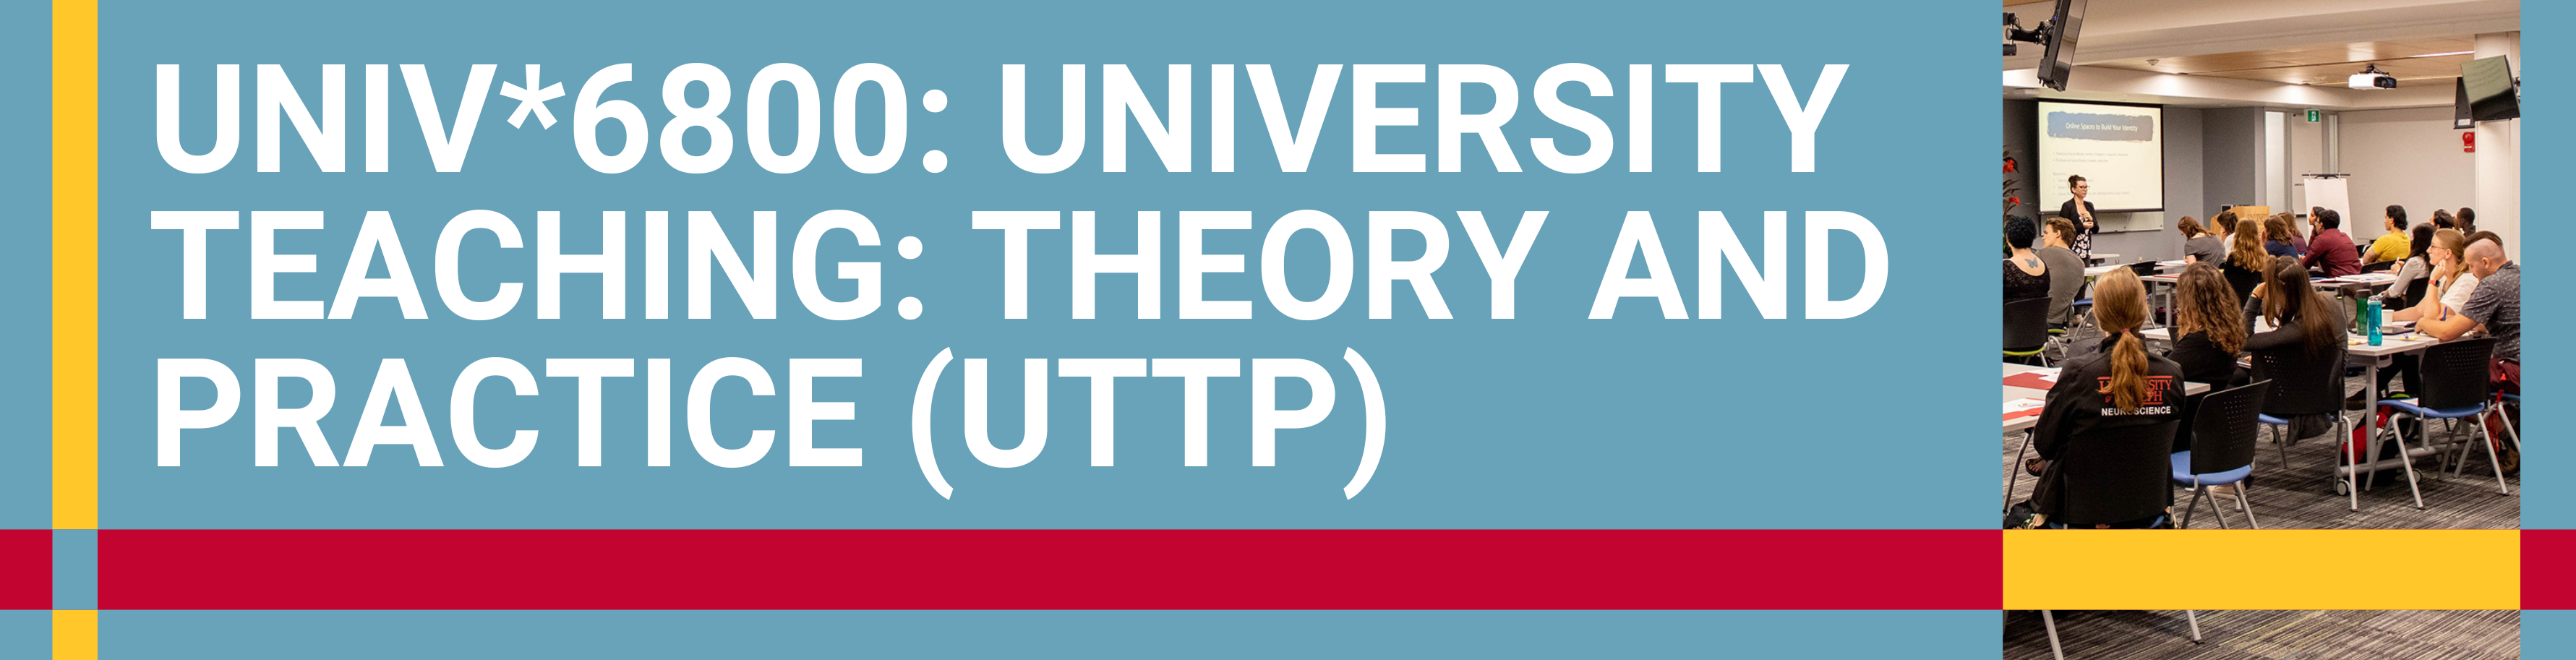 Register for UNIV*6800 – University Teaching: Theory and Practice